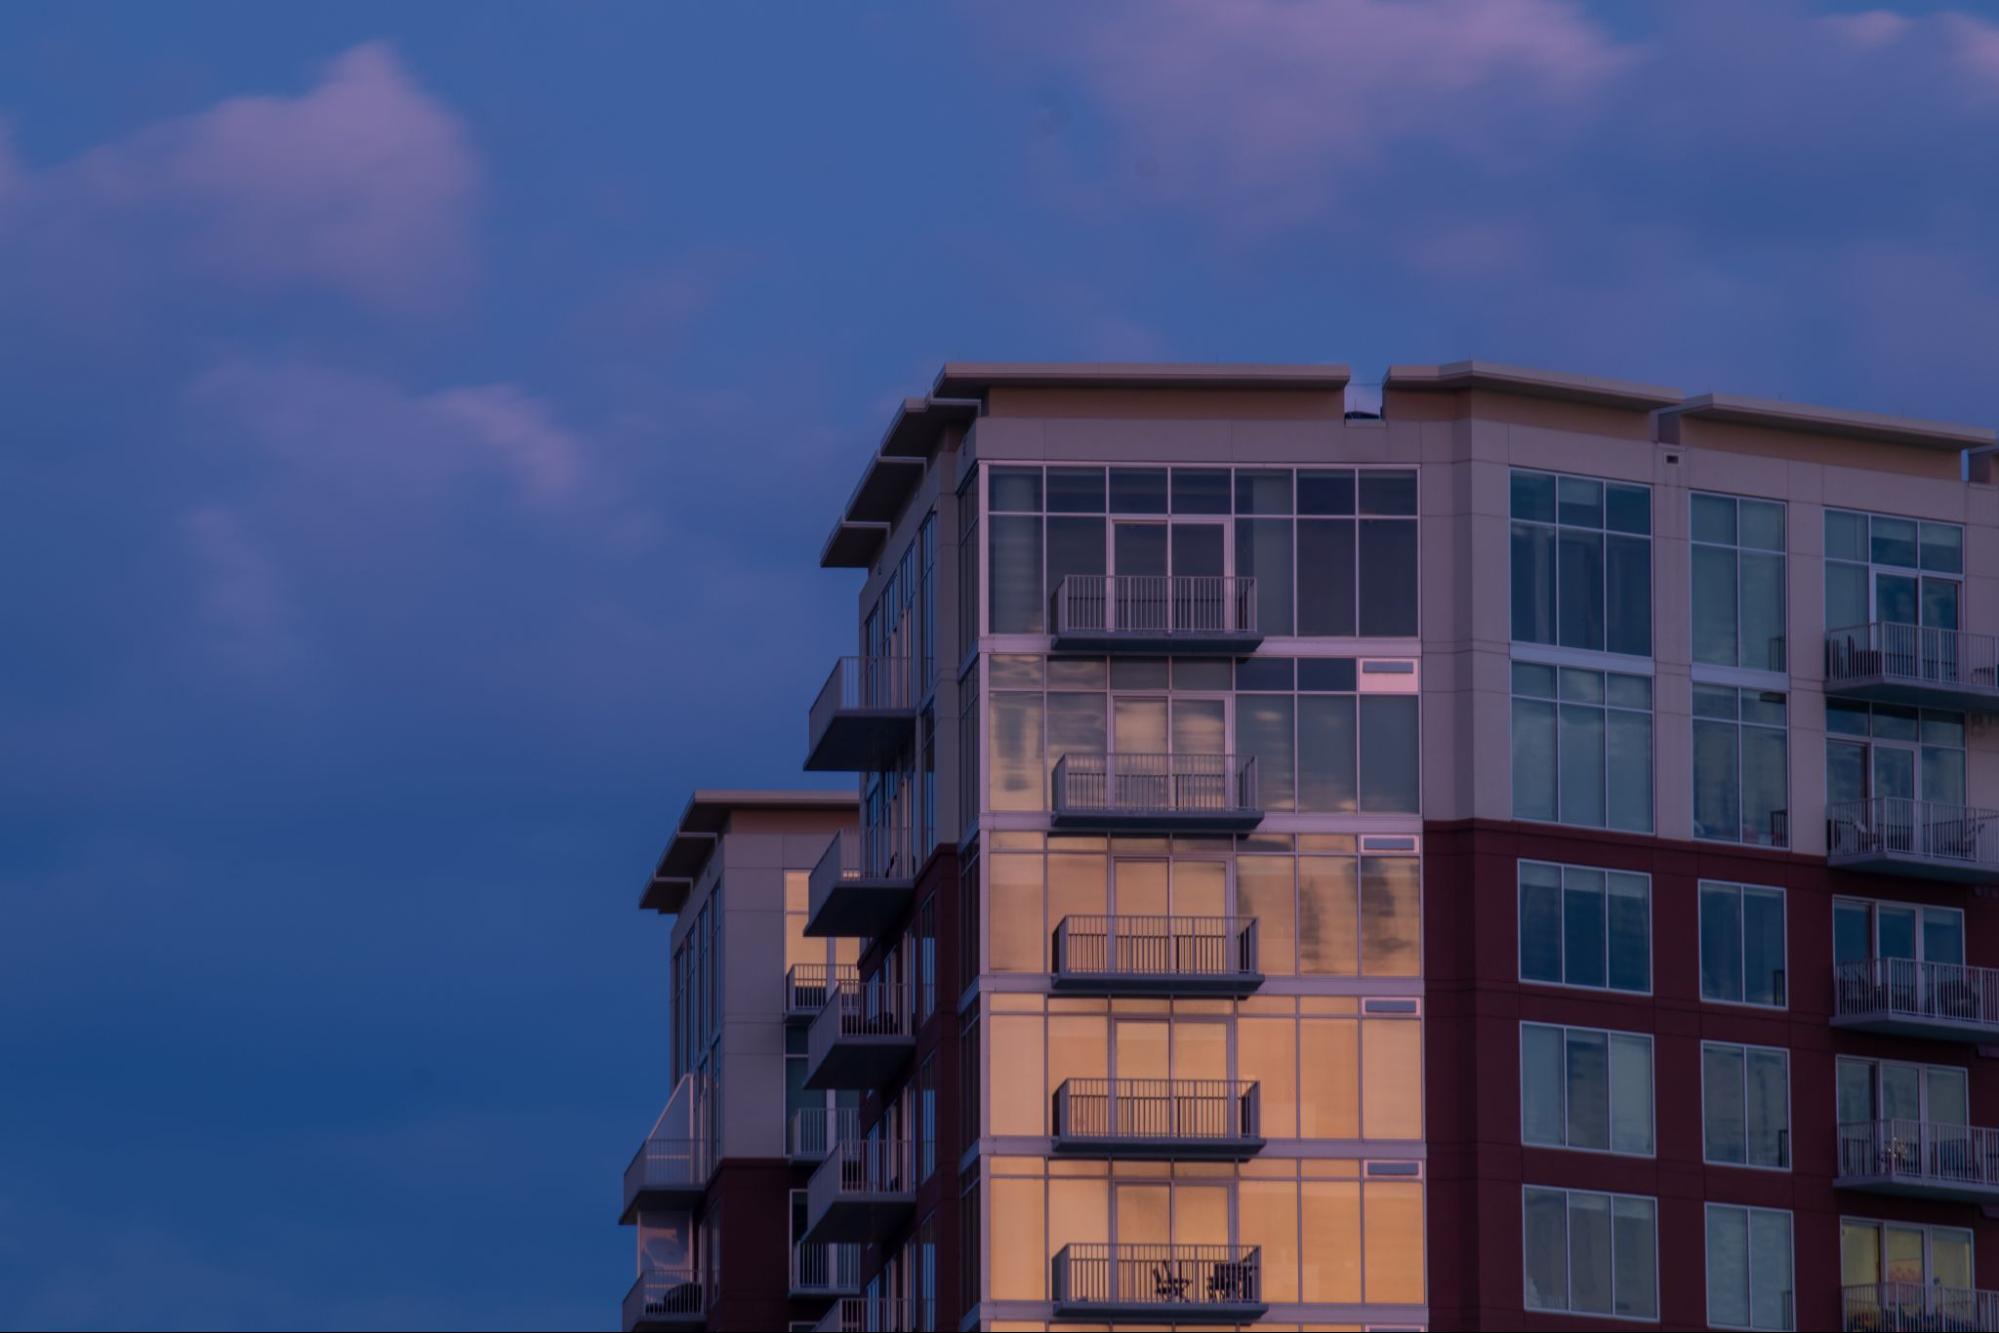 A high-rise apartment building in Nashville, Tennessee, during the sunset.